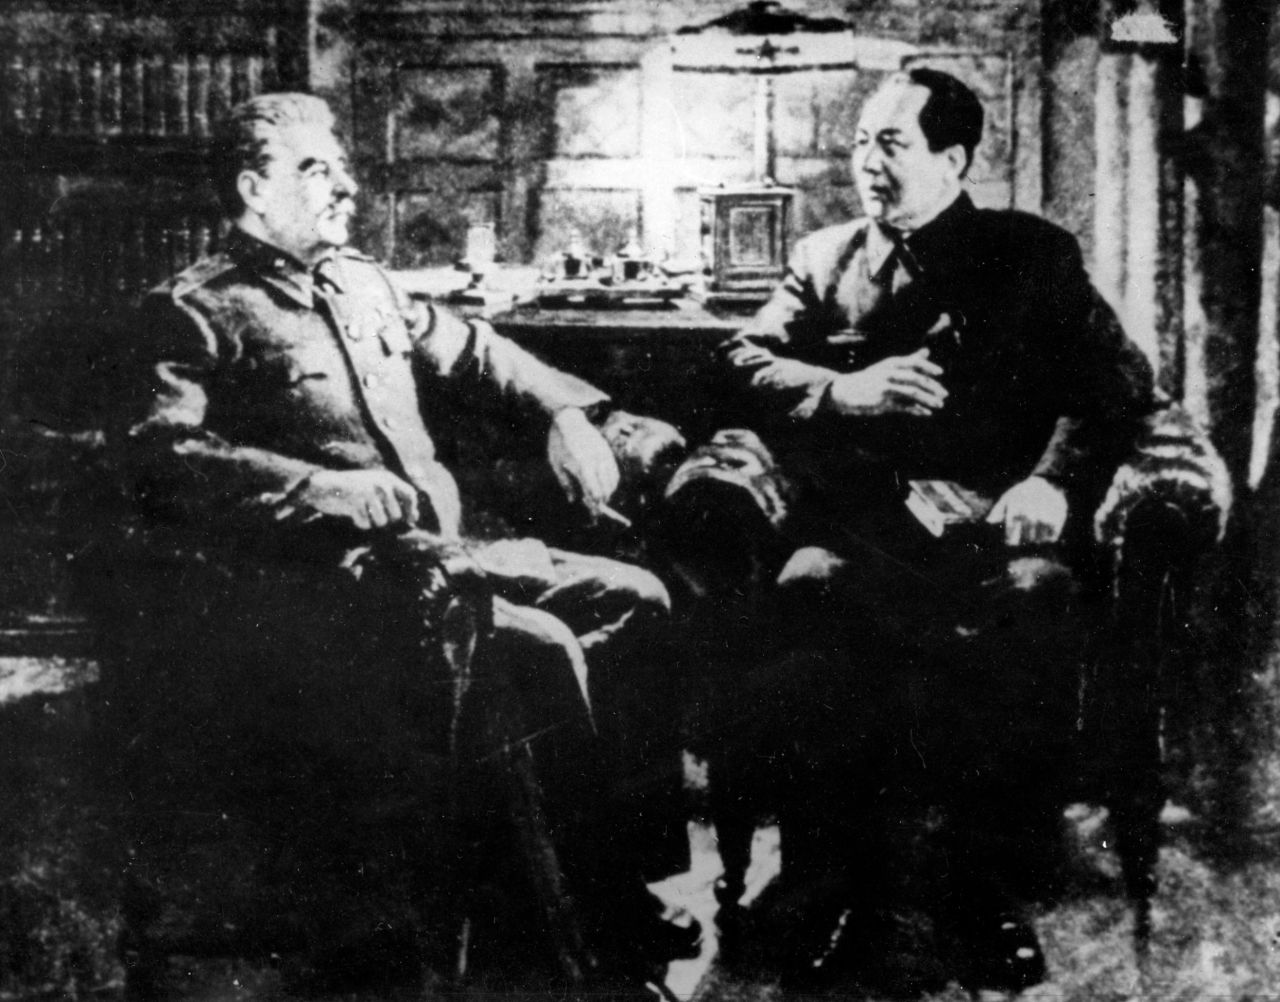 Joseph Stalin, left, meets with Mao Zedong in Moscow in December 1949. In June 1949, Chinese Communists declared victory over Chiang Kai-shek's Nationalist forces, who later fled to Taiwan. On October 1, Mao Zedong proclaimed the People's Republic of China. Two months later, Mao traveled to Moscow to meet with Stalin and negotiate the Sino-Soviet Treaty of Friendship, Alliance and Mutual Assistance.